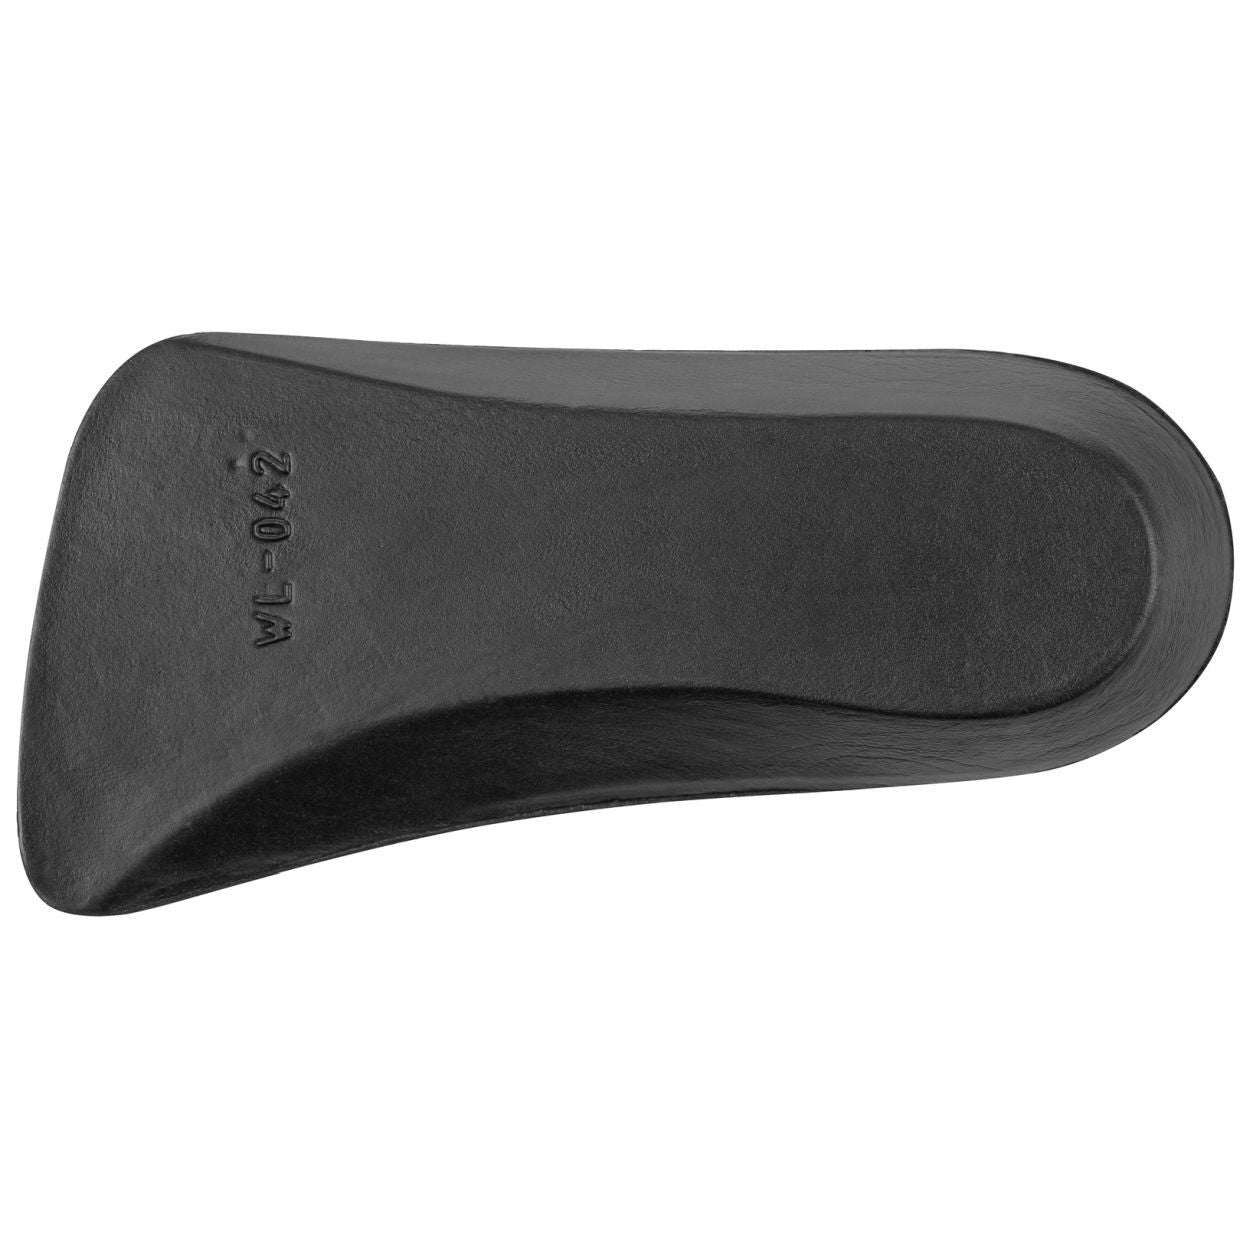 Elevator shoes height increase Height-Increasing Gel Insole Lifts - 0.5 Inches - IK108